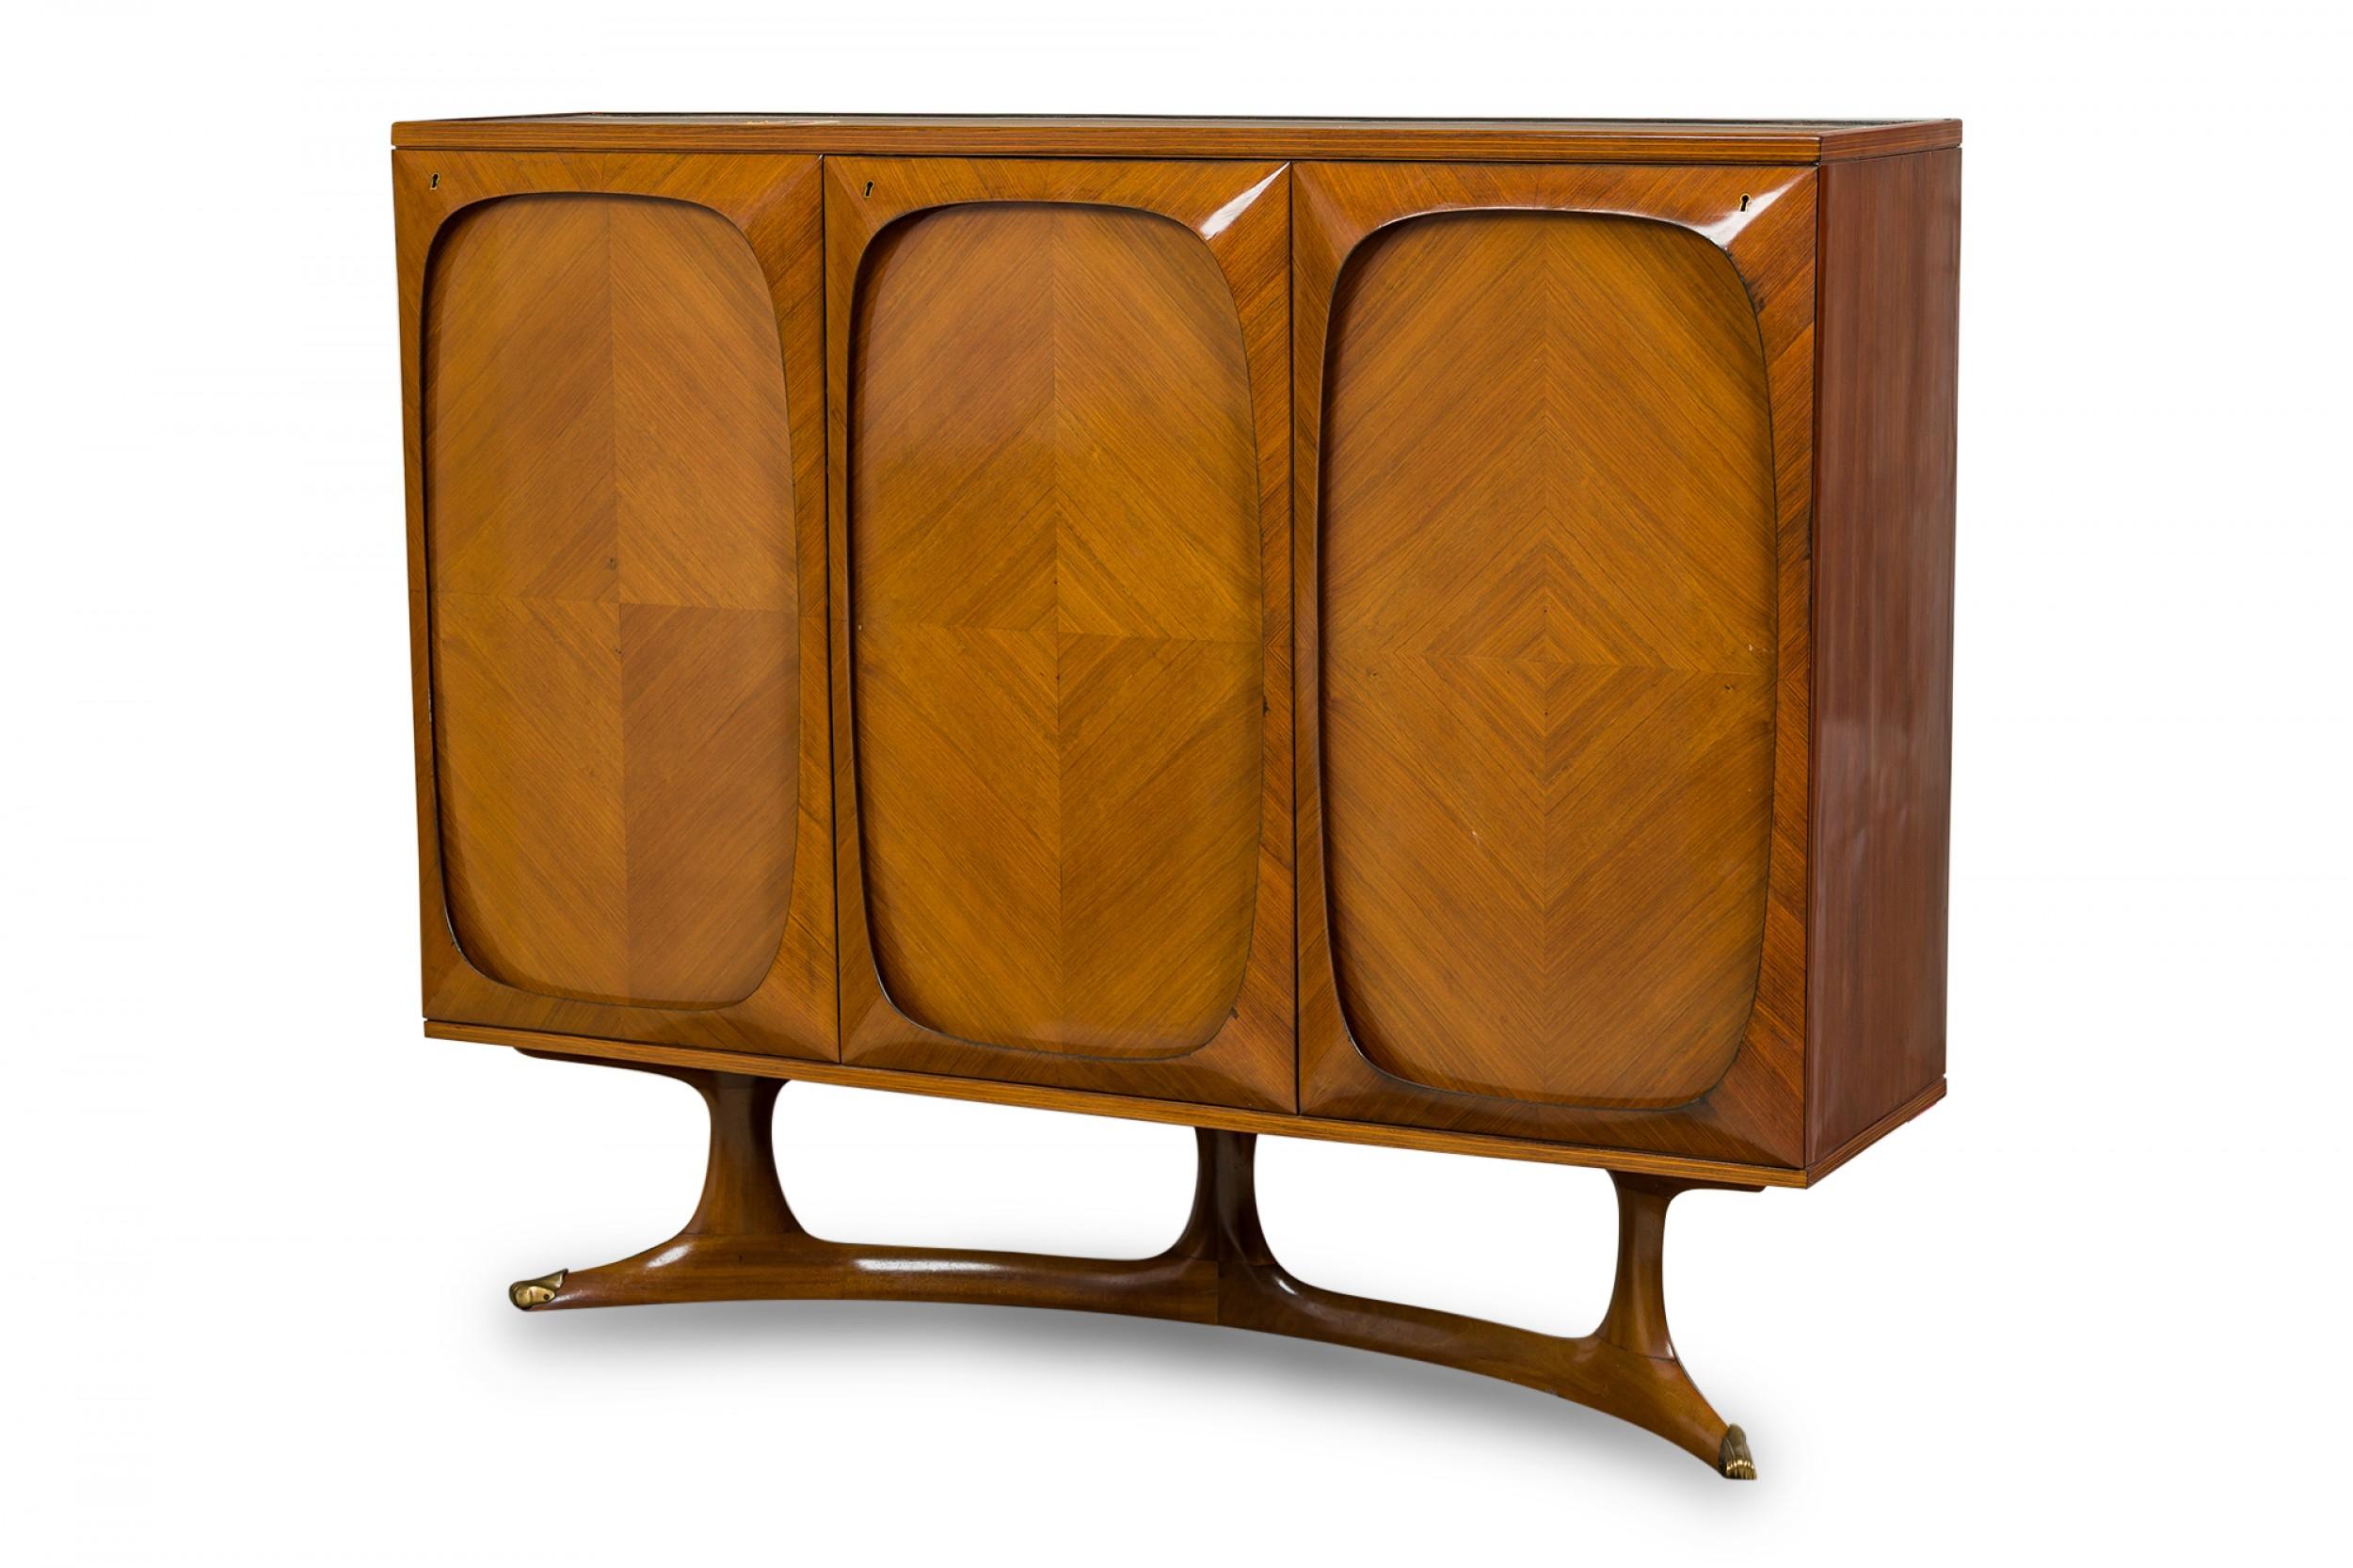 Mid-Century Italian (1950s) credenza / cabinet with a diamond patterned mahogany veneer, with three doors with oval framing that open on a hinge to reveal interior cabinets, resting on on an angle pedestal base (VITTORIO DASSI)
